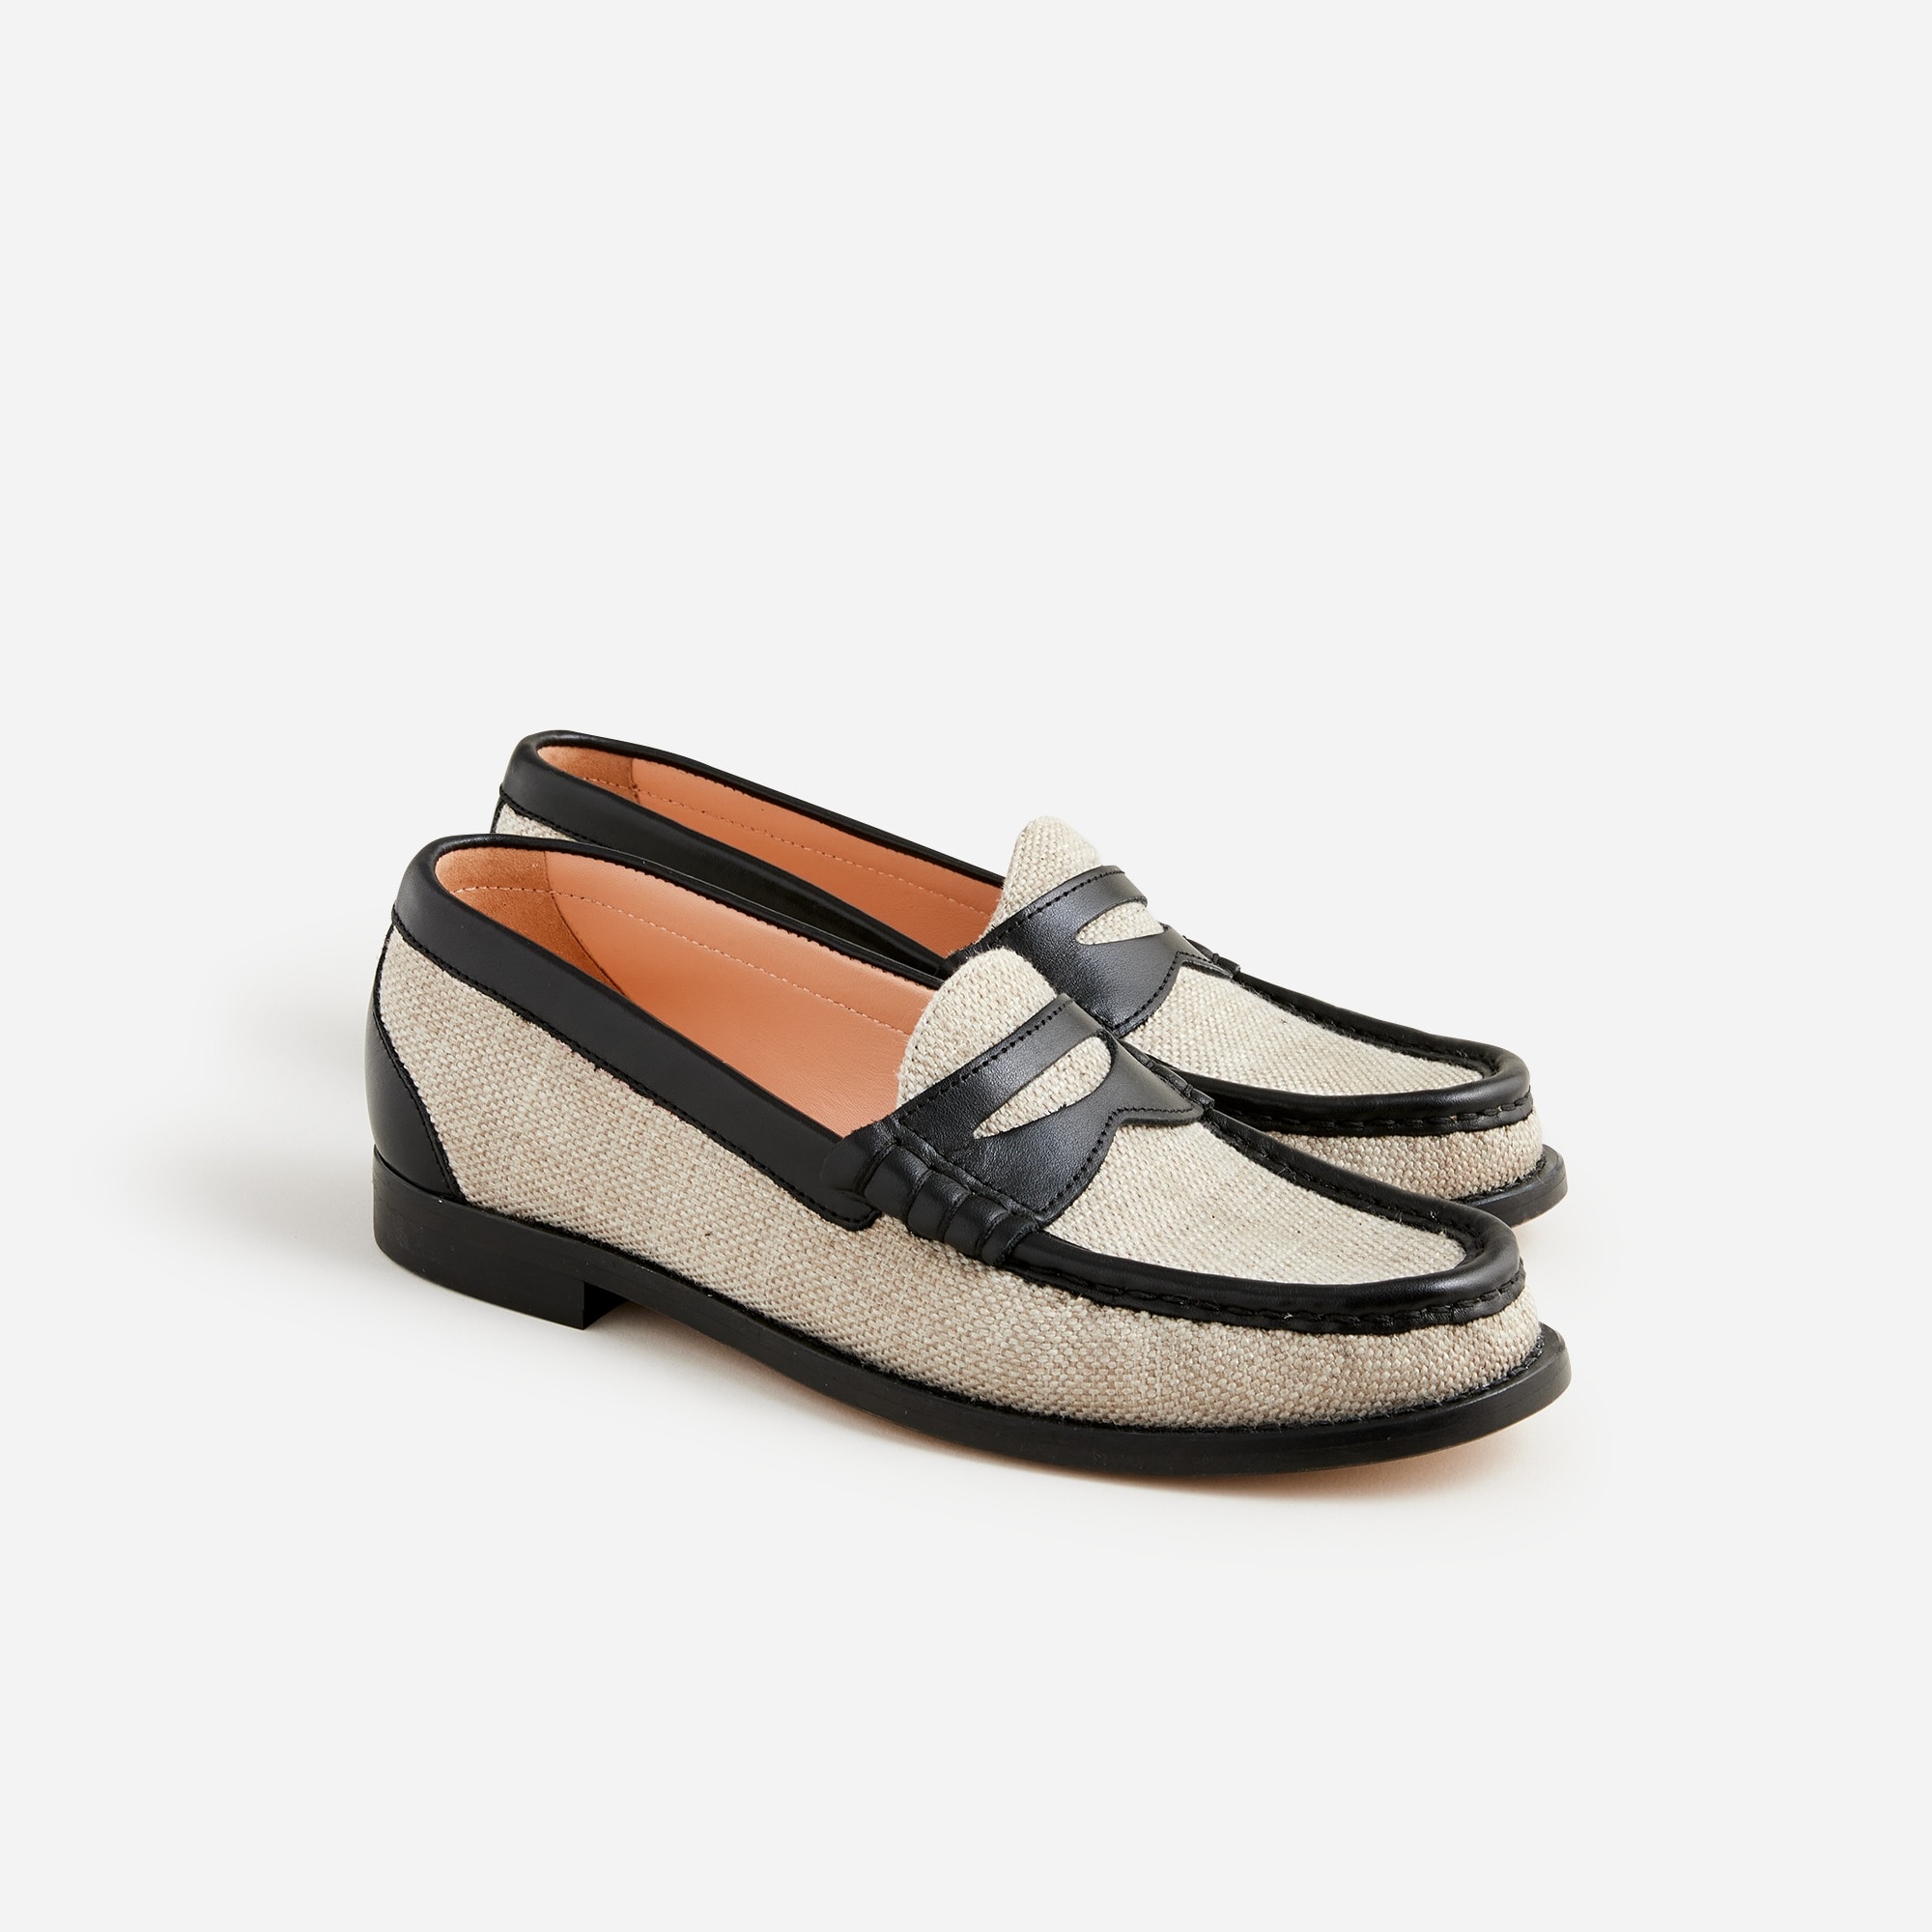  Winona penny loafers in Spanish canvas